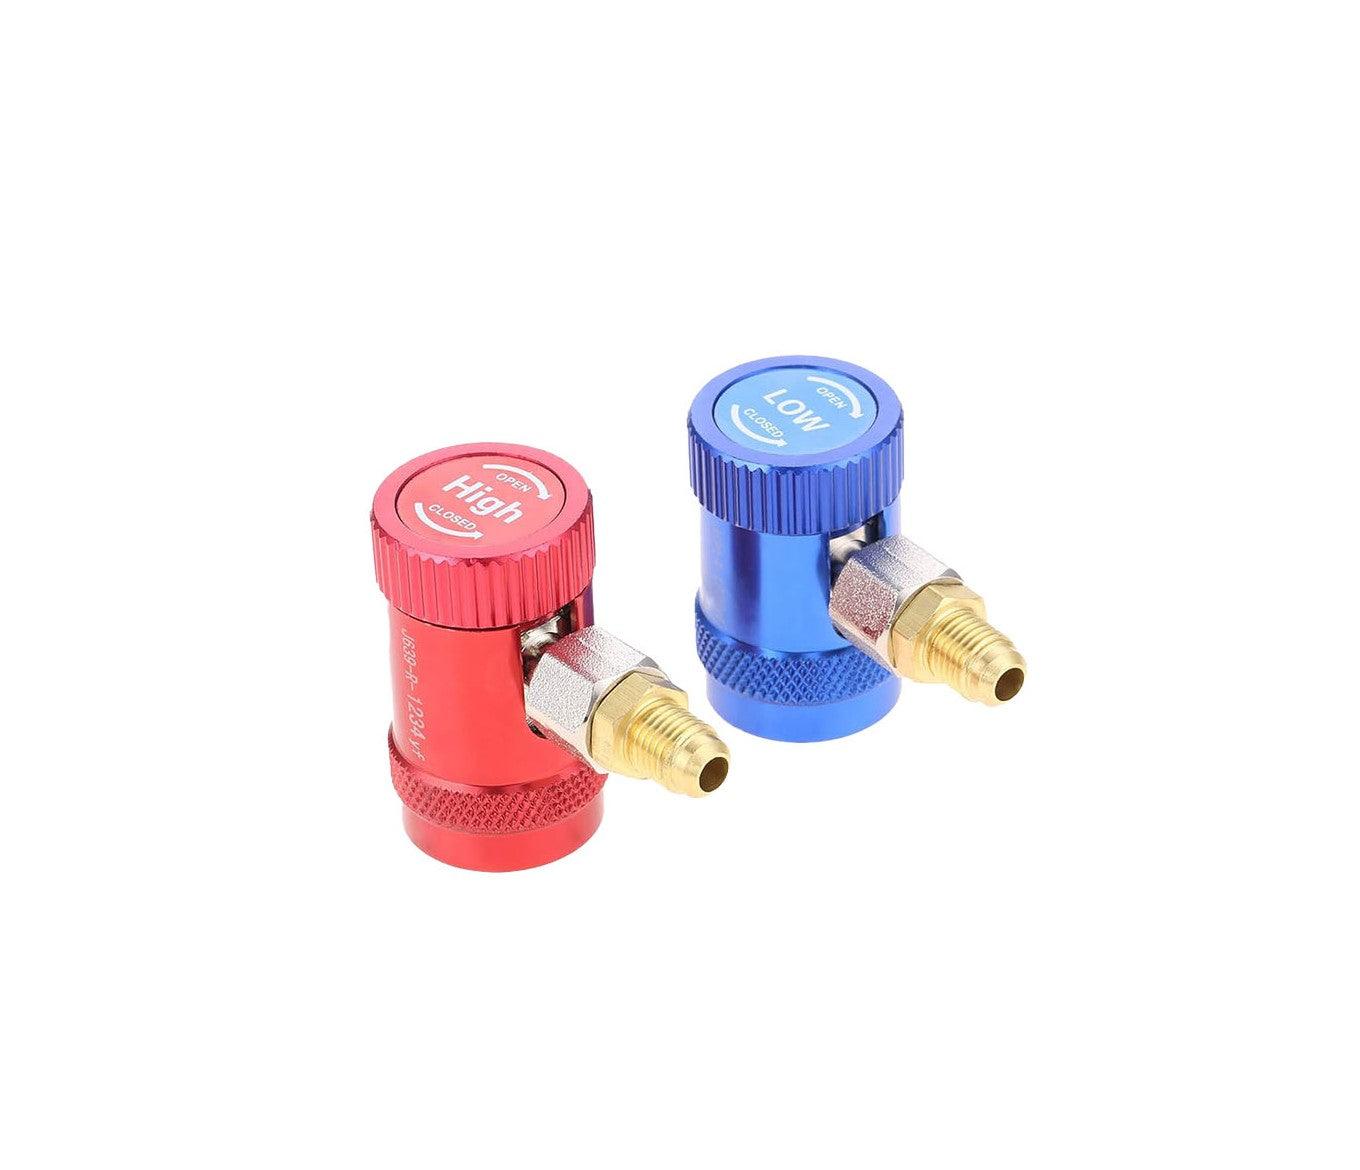 1234yf Quick Couplers with 1/4" Male Port - airtekproducts